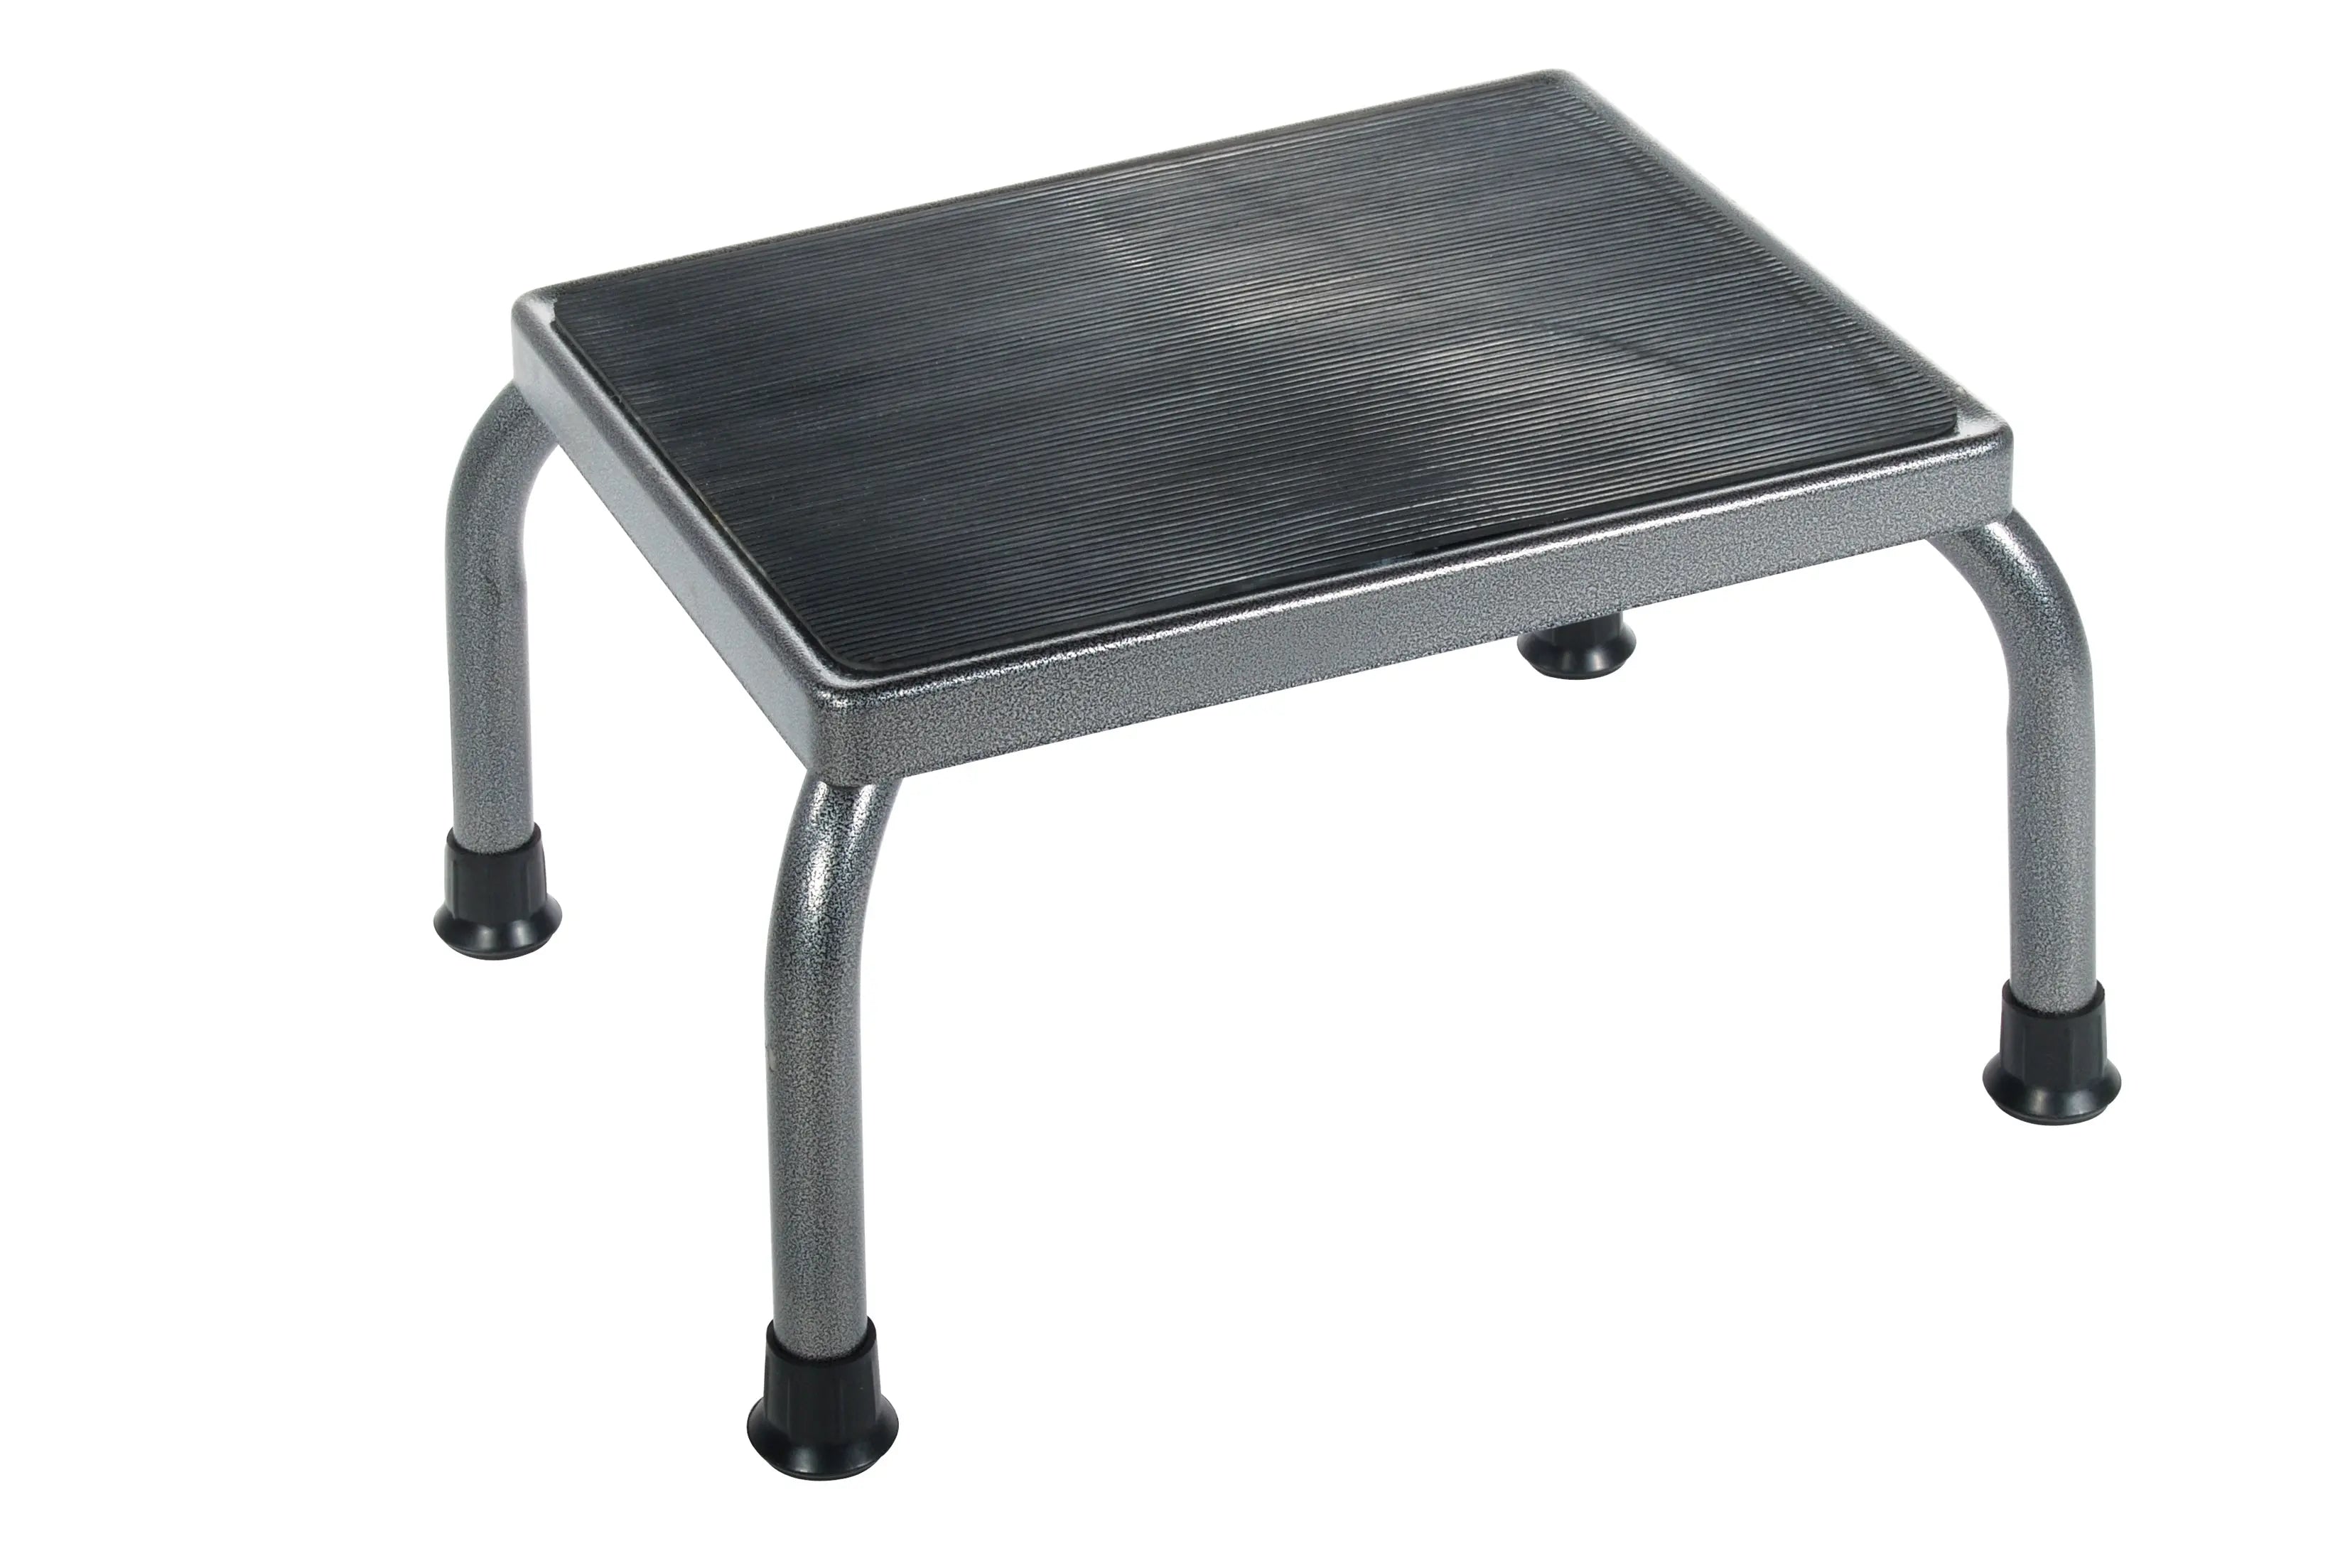 Footstool with Non Skid Rubber Platform - Home Health Store Inc